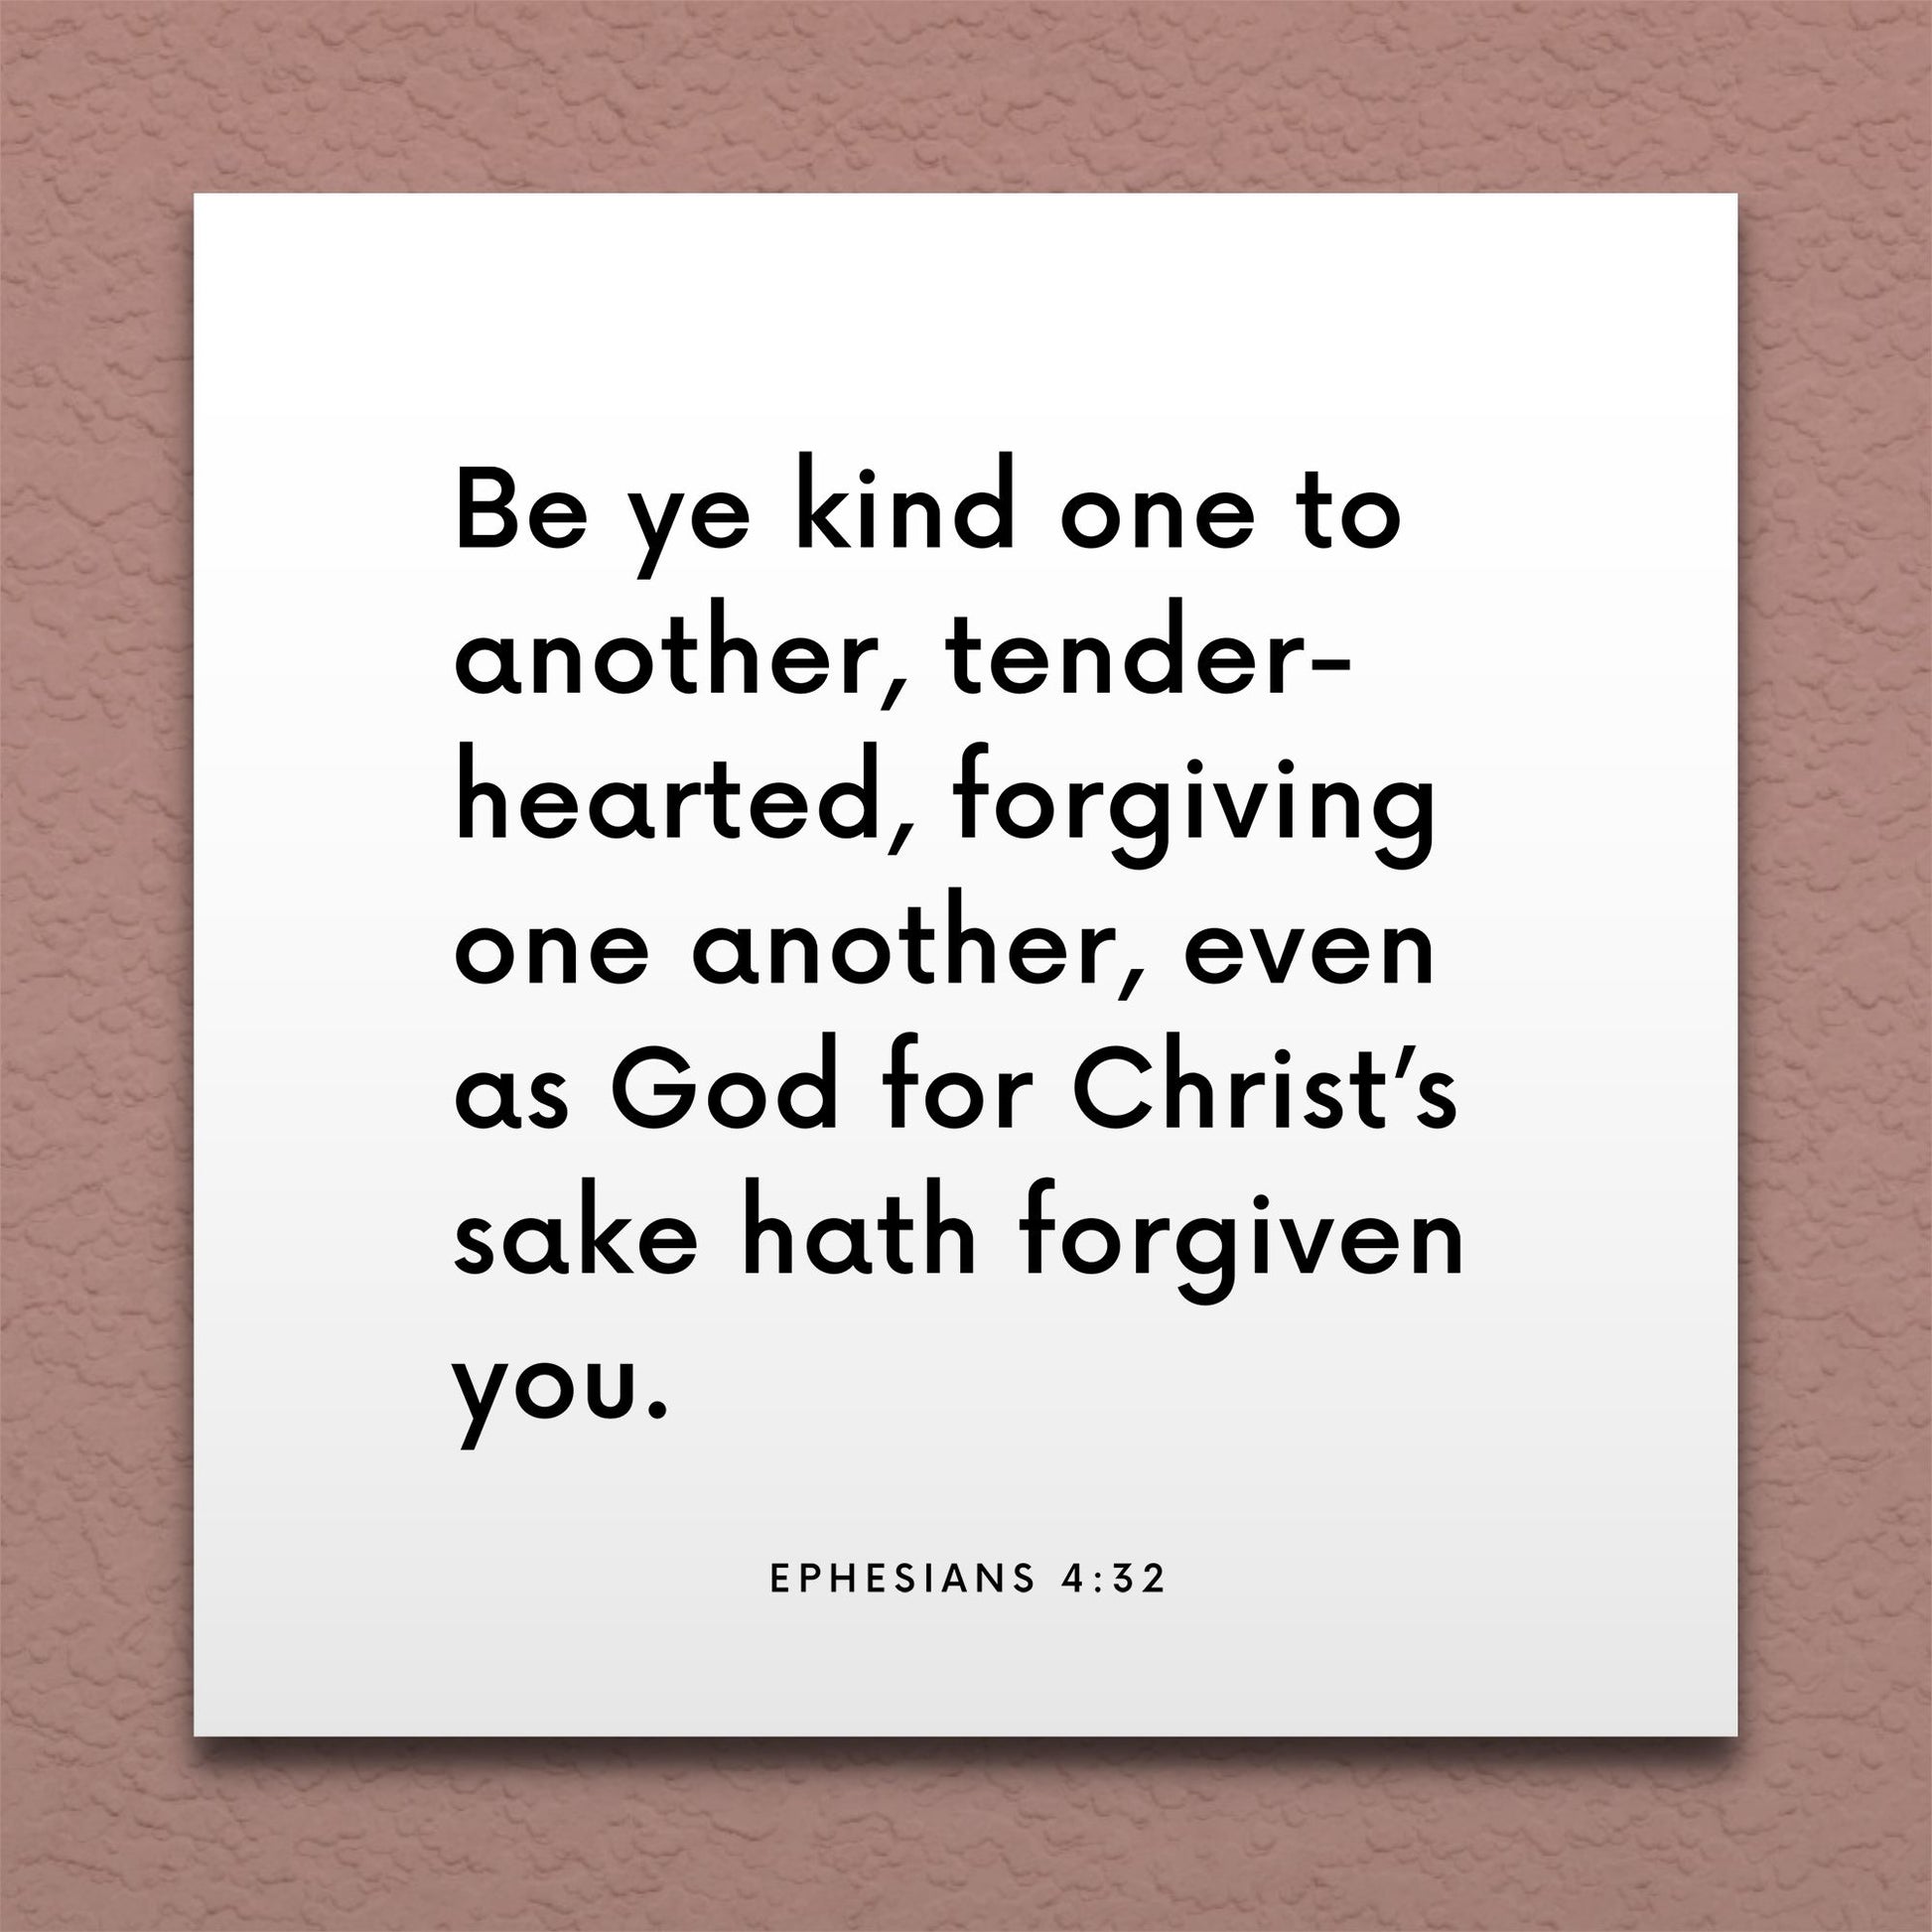 Wall-mounted scripture tile for Ephesians 4:32 - "Be ye kind one to another, tenderhearted"